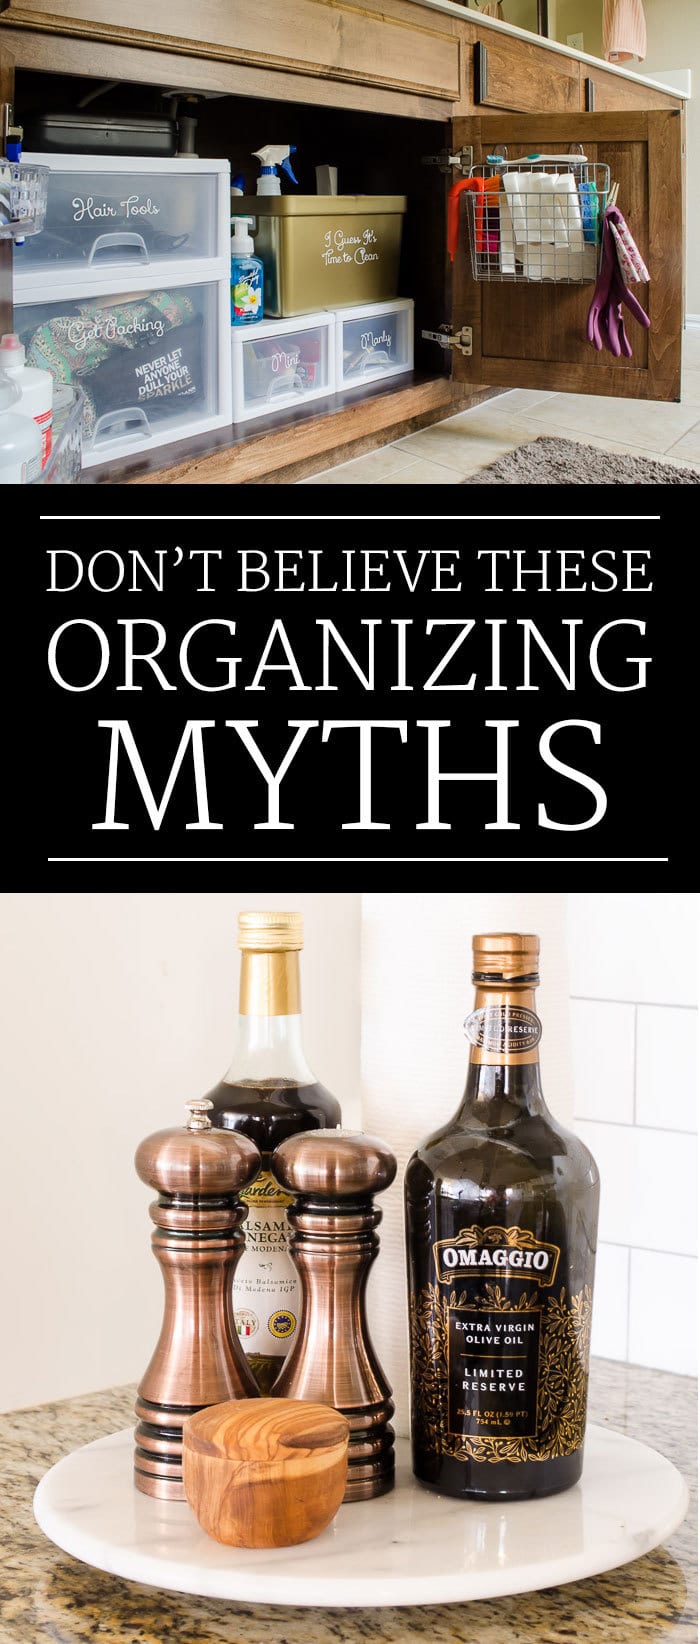 Wish your home was more organized? These myths could be holding you back. 